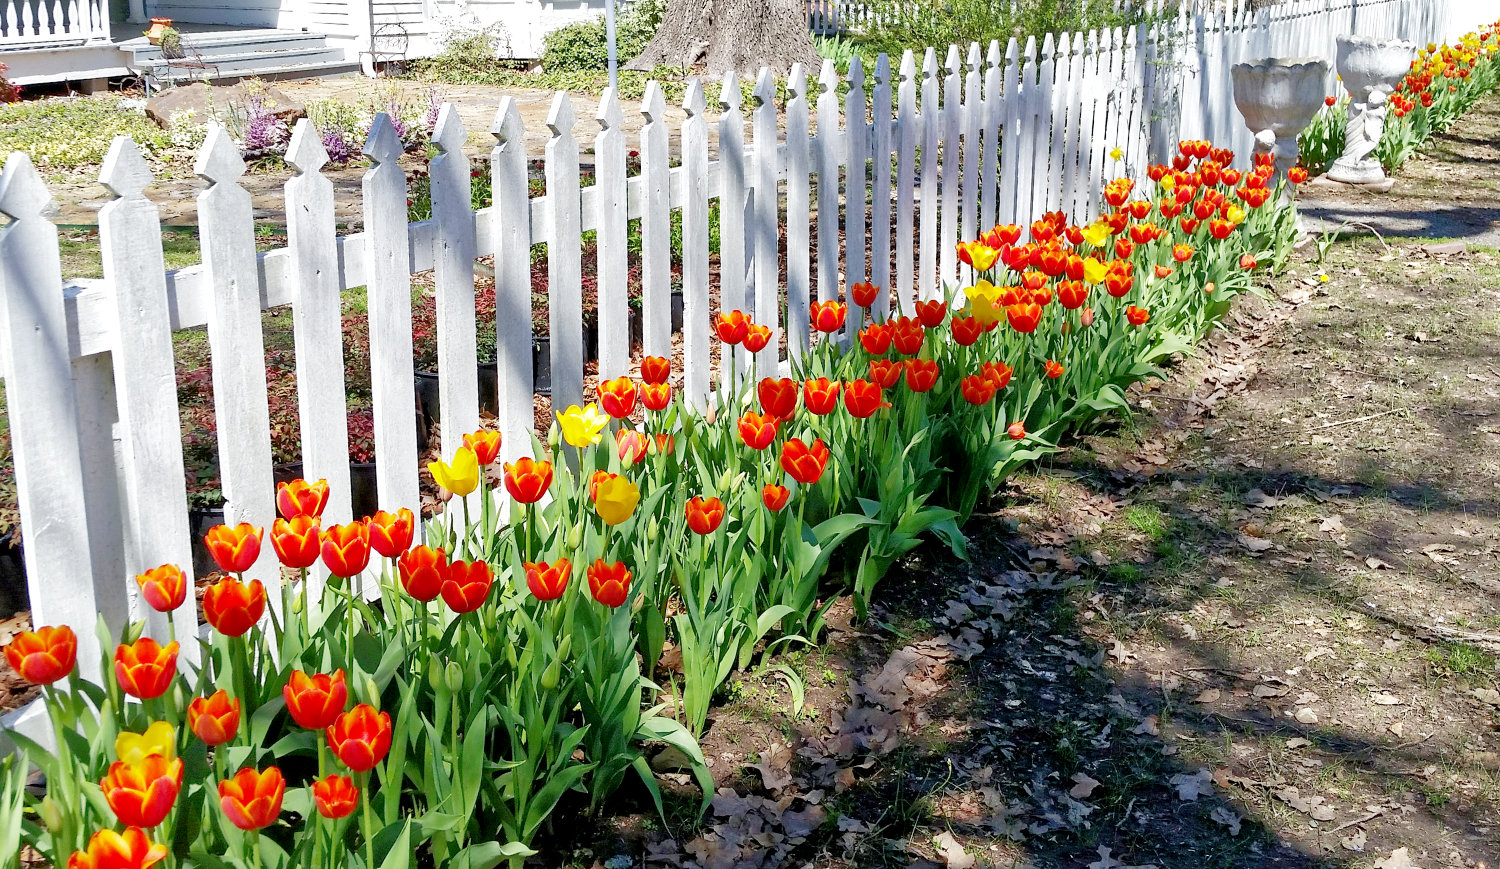 Tulip bulbs aren’t long-lasting in Texas, but they can be beautiful.